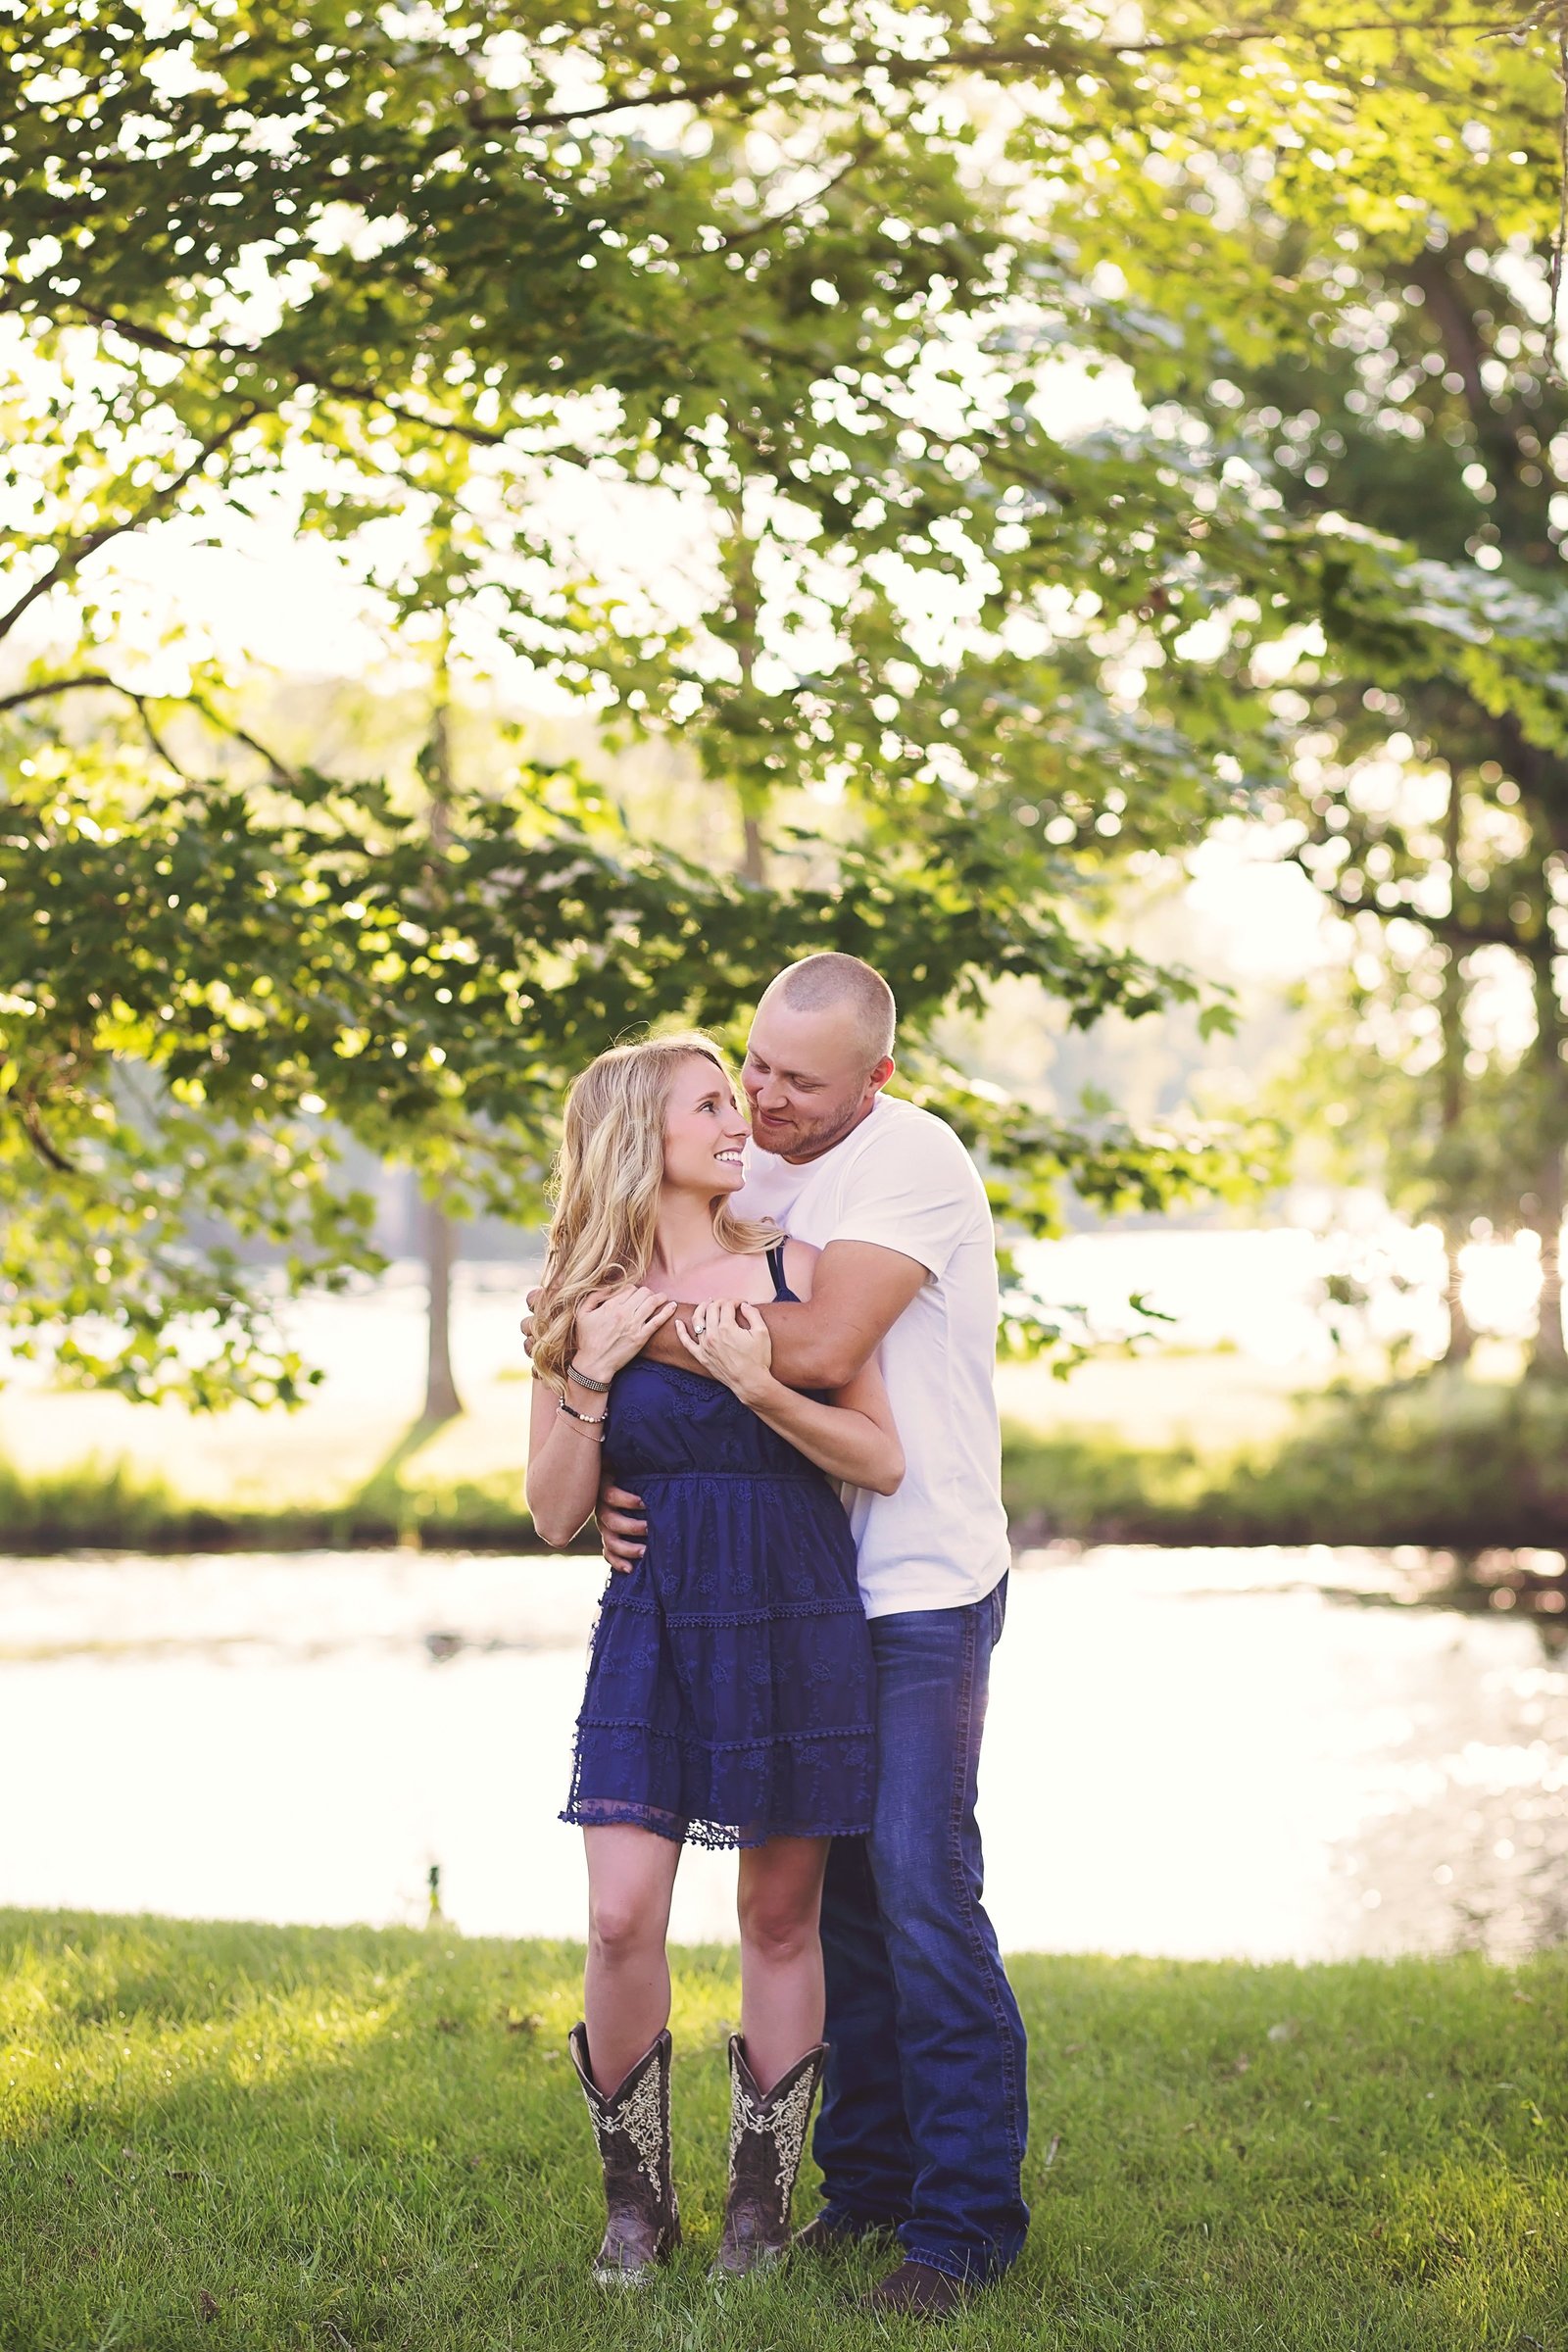 Engagement and Wedding Photographer in Iron Mountain, MI with Photos by Ciera http://www.photosbyciera.com